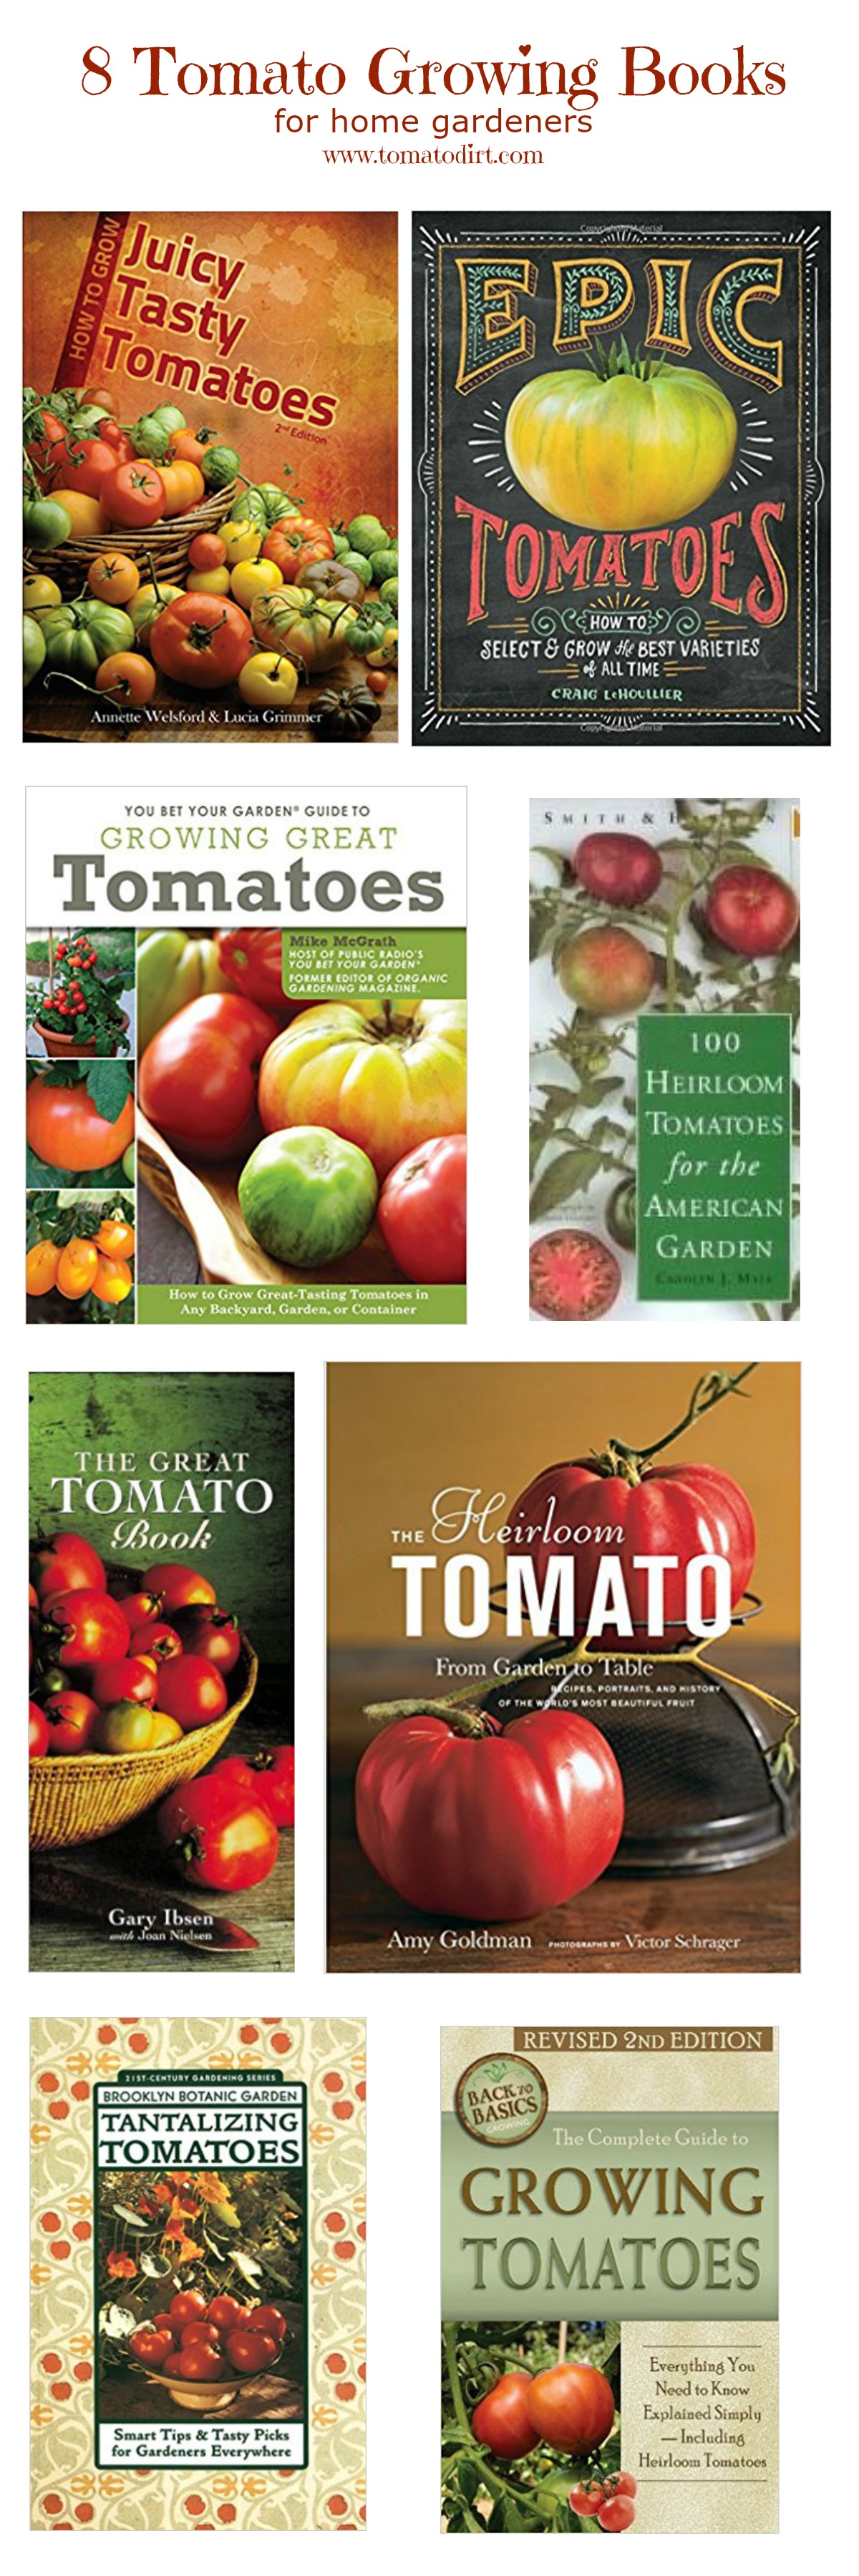 8 tomato growing books with Tomato Dirt